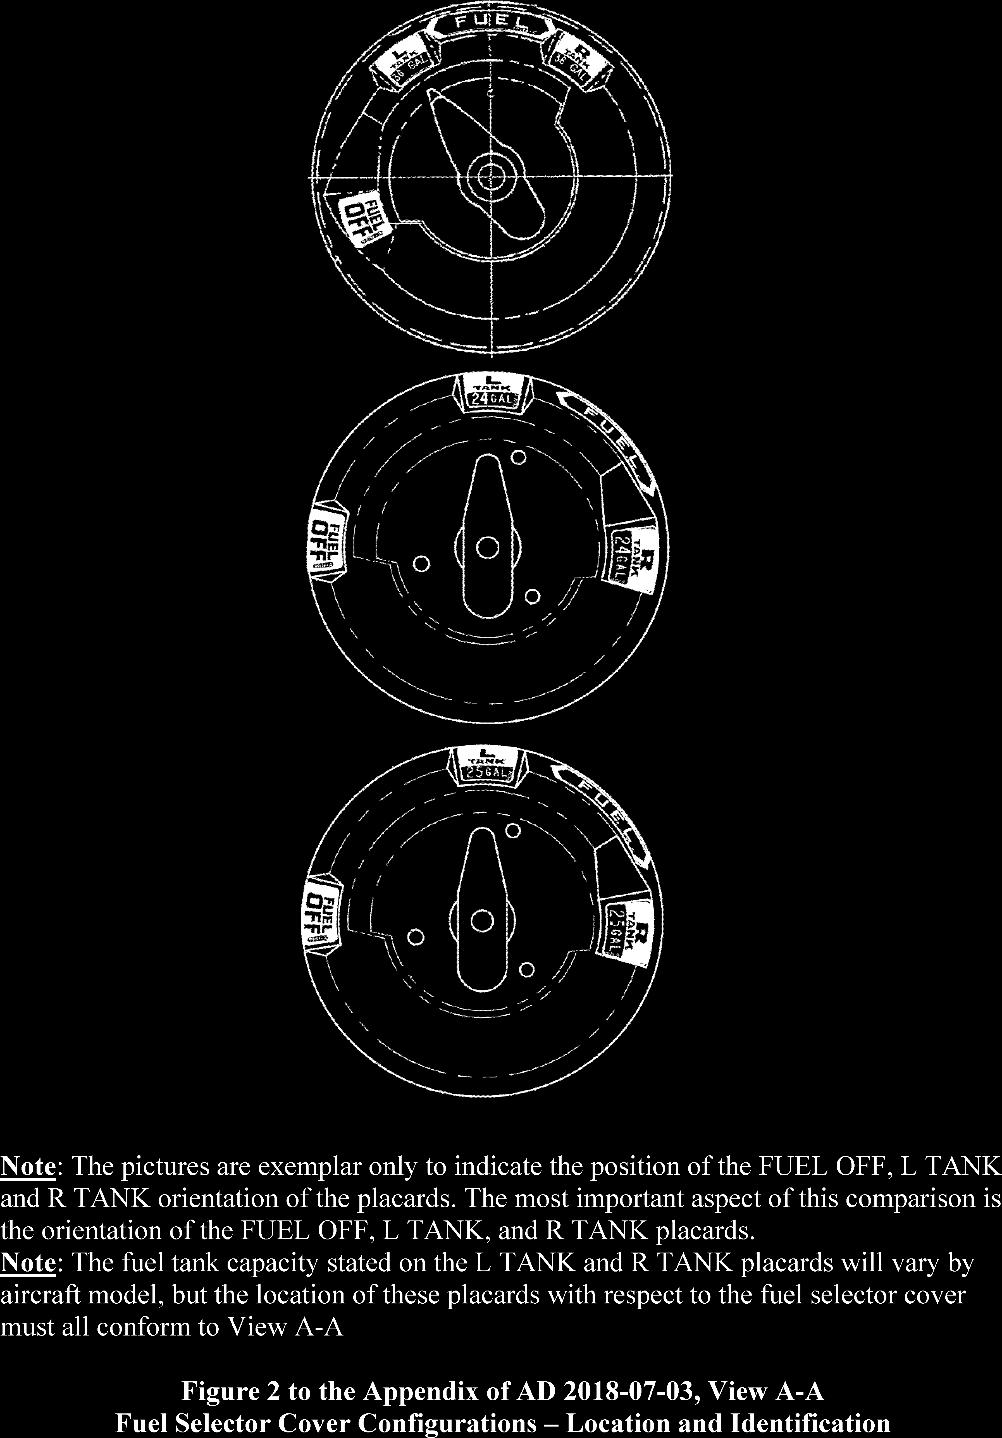 (2) Compare the currently installed fuel selector cover to the illustration in Figure 2, View A-A.